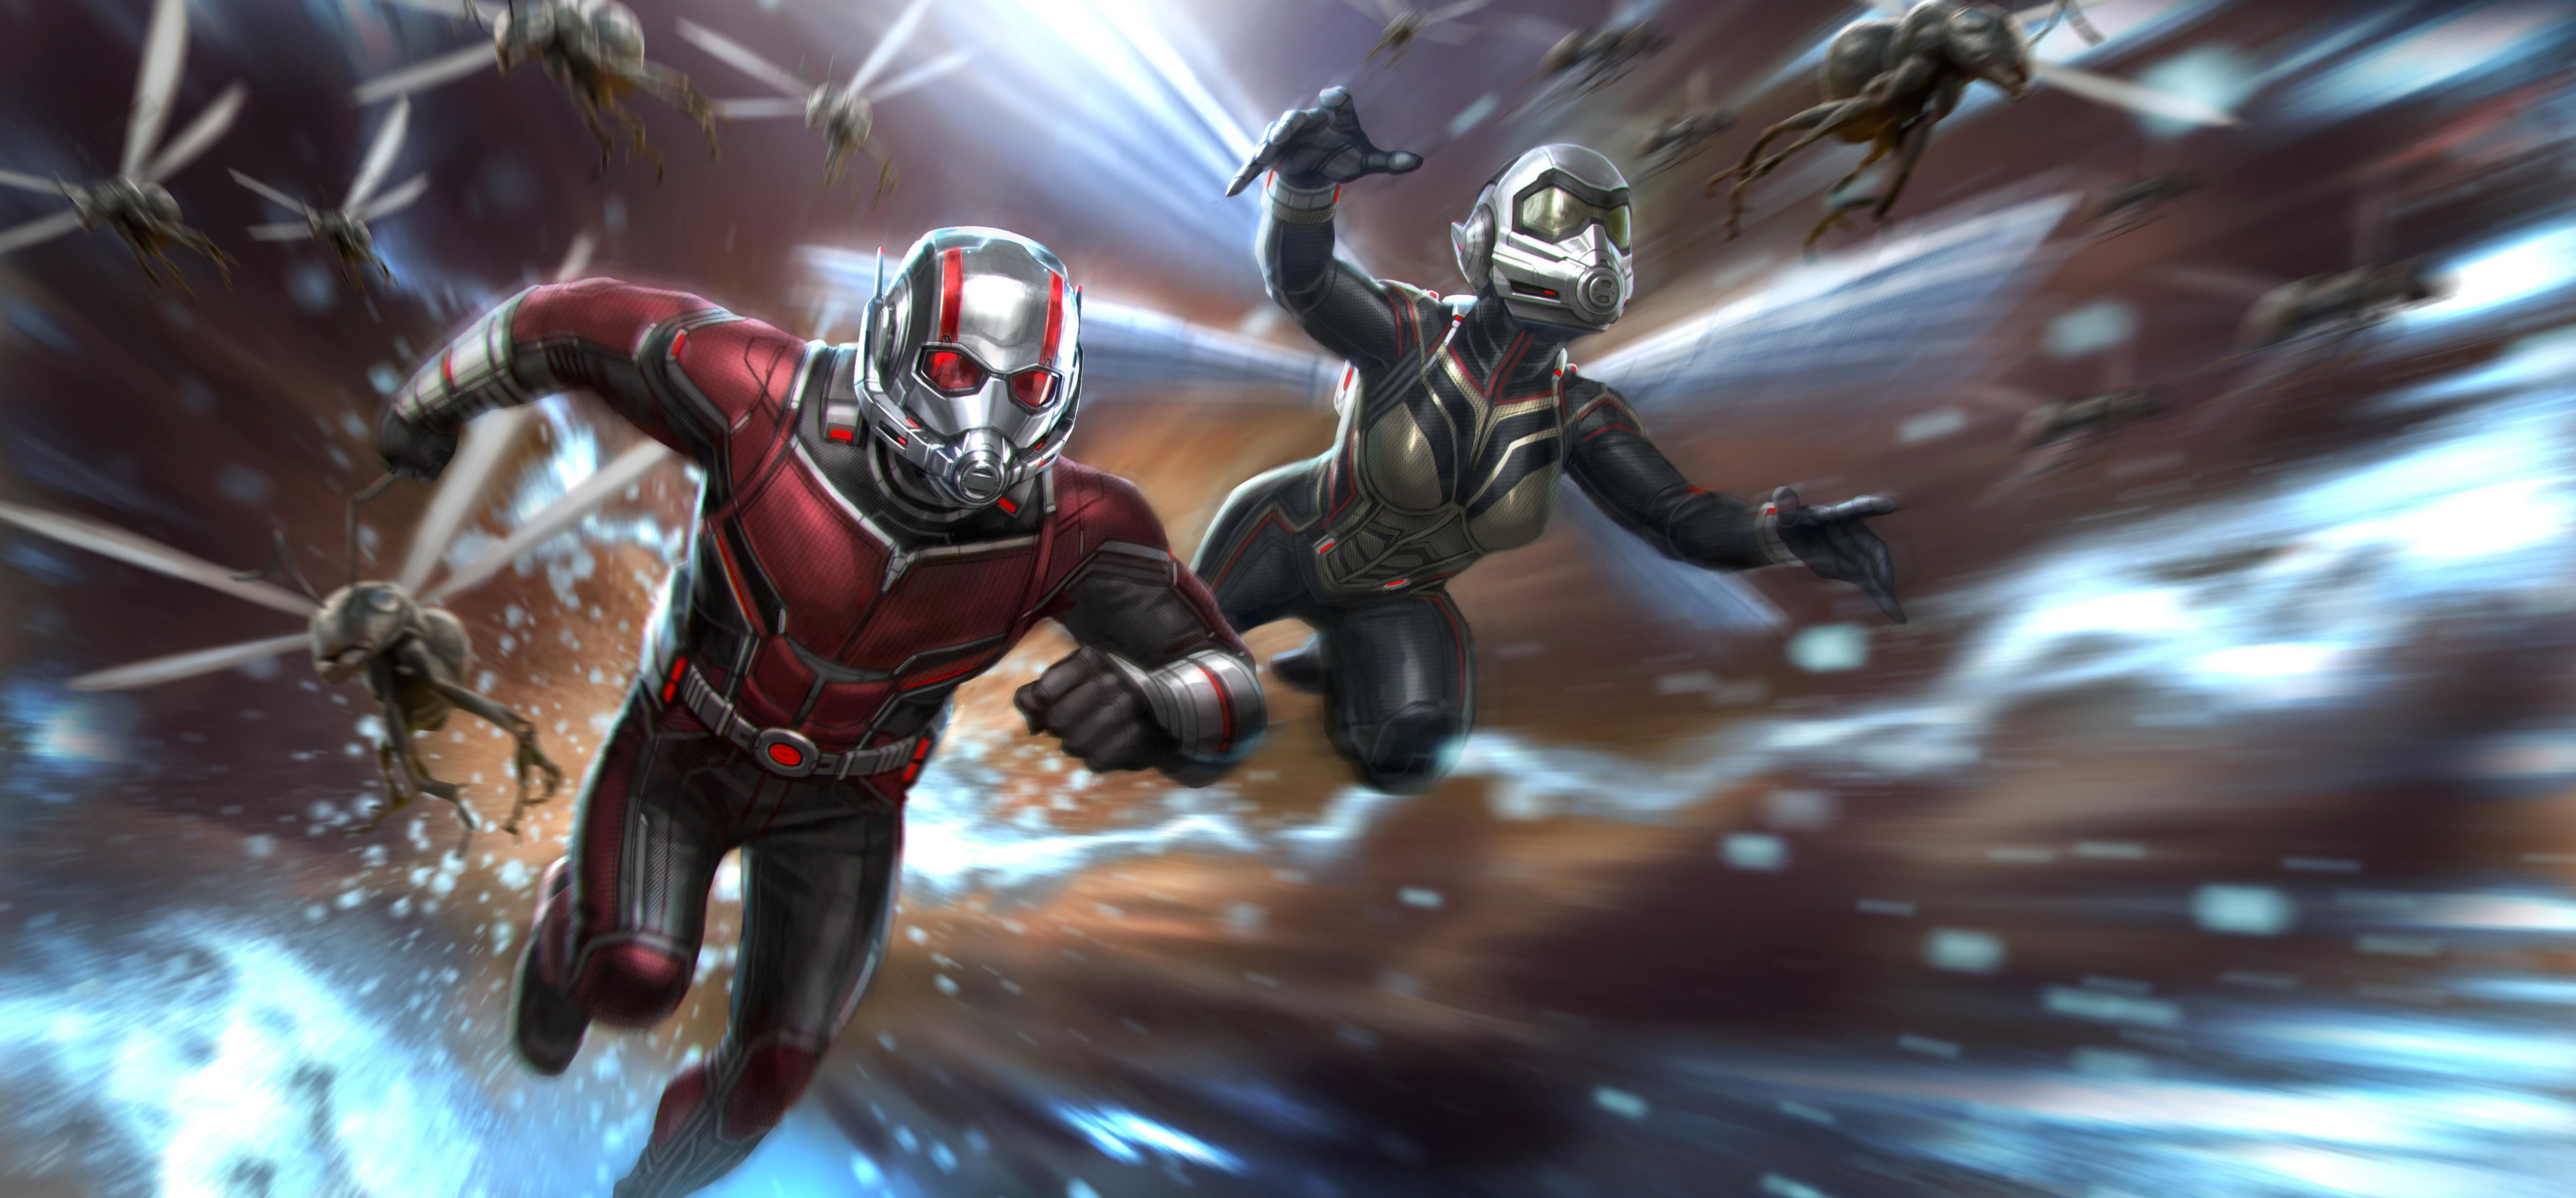 Ant-Man and the Wasp 4k Ultra HD Wallpaper by Ryan Meinerding